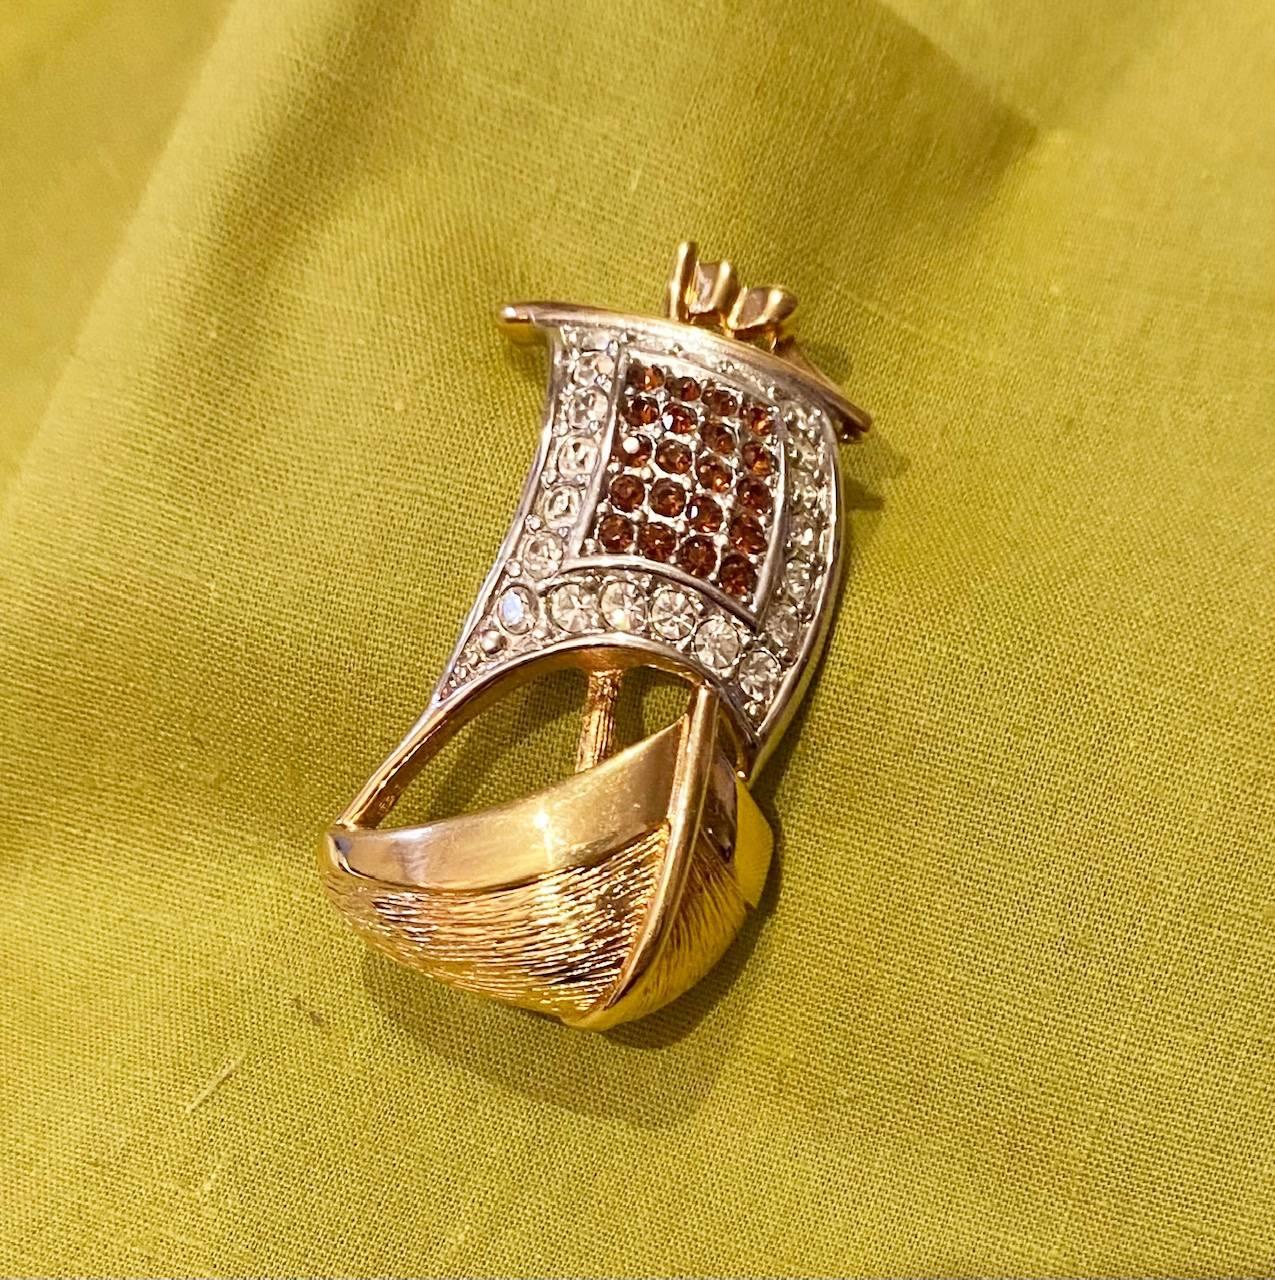 1980's Burberry Vintage Sailing Ship Brooch Pin Pave Crystal Gold Plated, This pin is comprised of a textured, brushed gold and polished hull with a fully-blown sail in topaz gold and clear crystals, all of which are intact This piece is ideal for